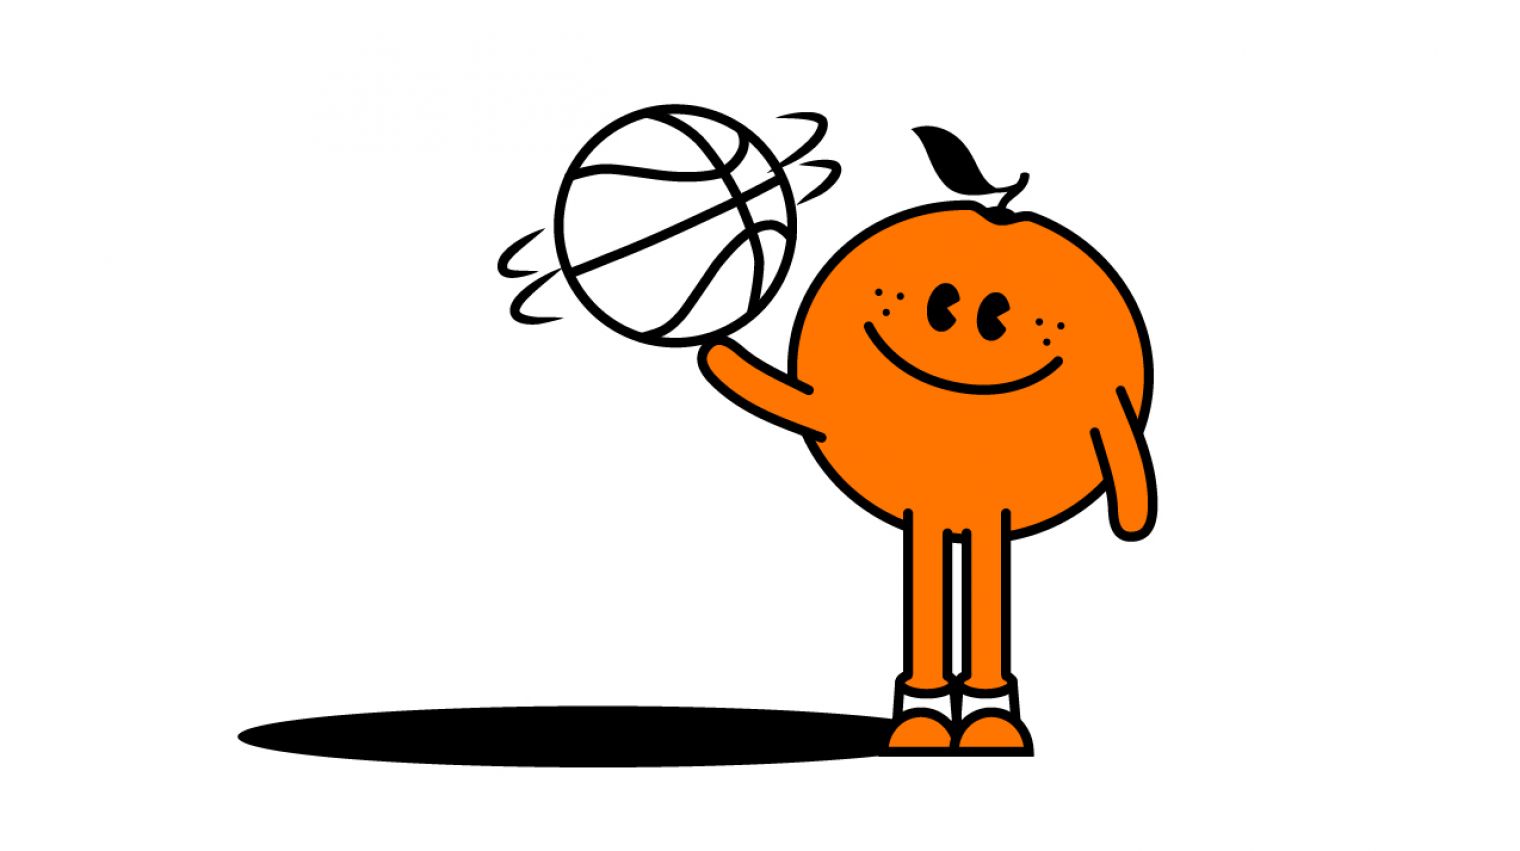 Tangerine and NBL: connecting fans with courtside thrills